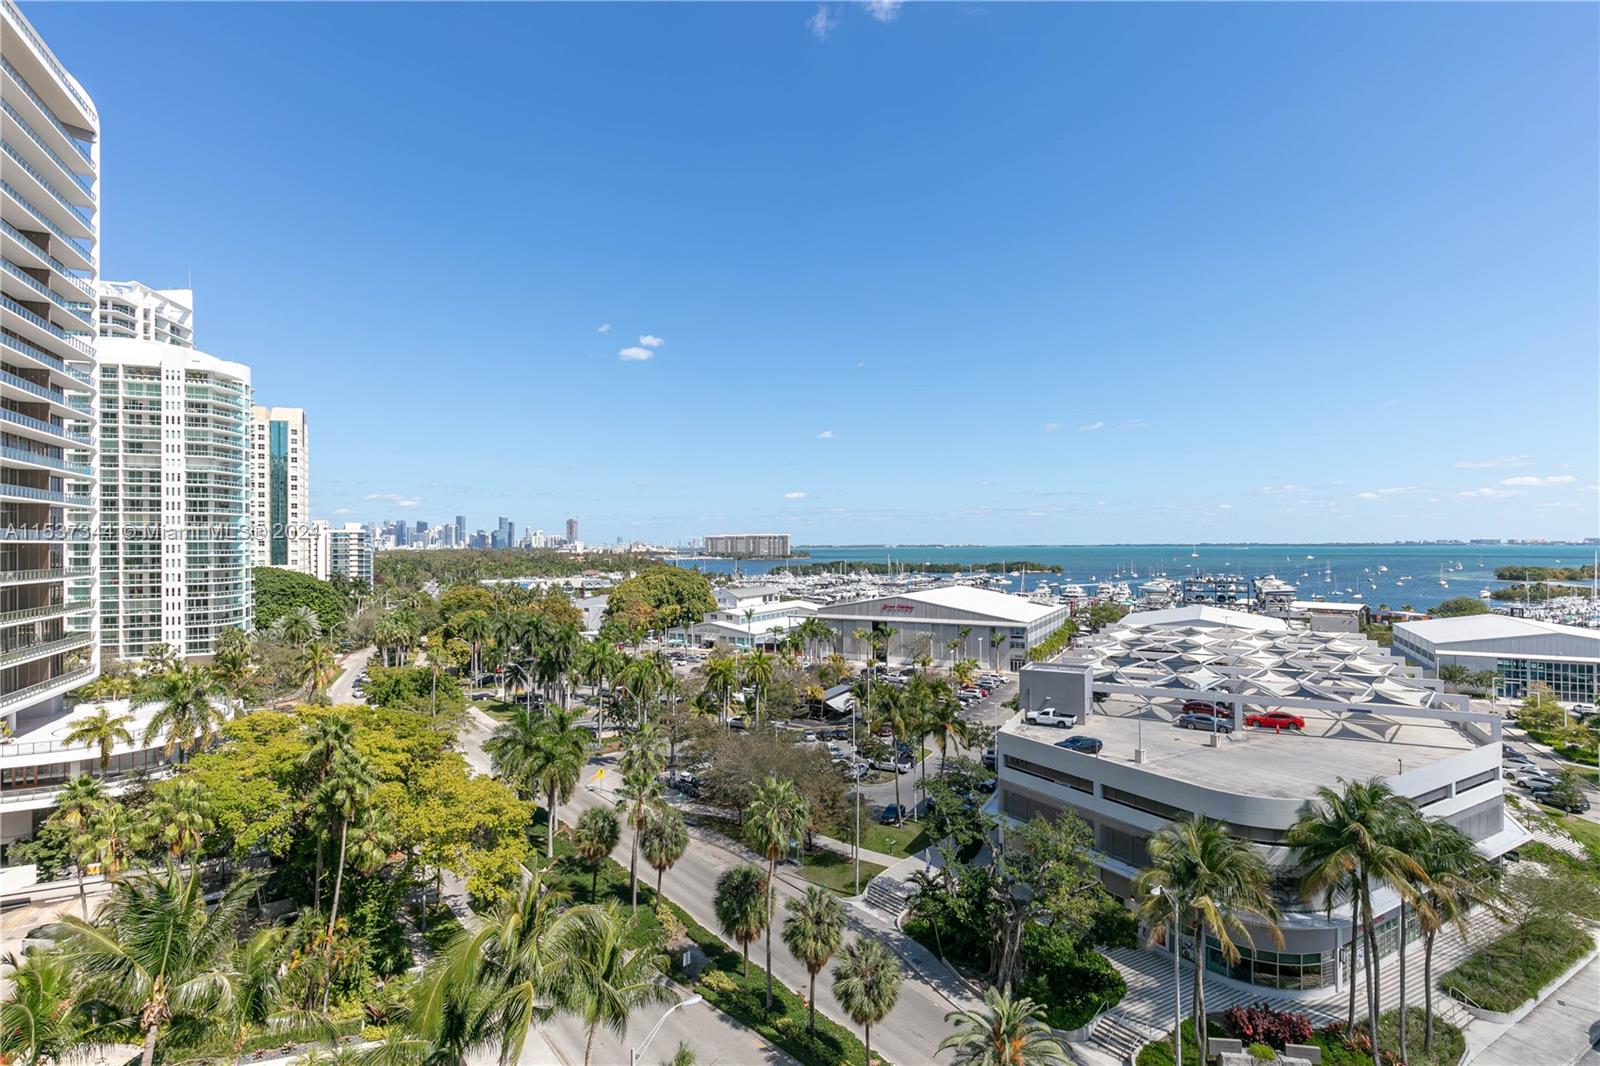 Welcome to Grove at Grand Bay Residence 802S. This stunning 3,895sf residence is being offered Fully Furnished. 4 BR/ 4.5 BTH, & professionally curated finishes. Most sought after SE exposure unit with panoramic views of Biscayne Bay & Miami's skyline. Featuring 12' high, floor-to-ceiling glass leading to wraparound terraces that are 12' deep. A spacious primary bedroom w/ bay views & an expansive walk-in closet & primary bath.  Secondary bedrooms each have ensuite baths. The kitchen is a chef's dream w/ top of the line Miele appliances, Snaidero Cabinetry, Cristallo Quartzit tops. Owners have access to the best amenities: 24 hr concierge/valet service, Butler, private owners only restaurant, spa, gym, pool. Located w/in walking distance to best dining, shops, parks, & school's in Miami.